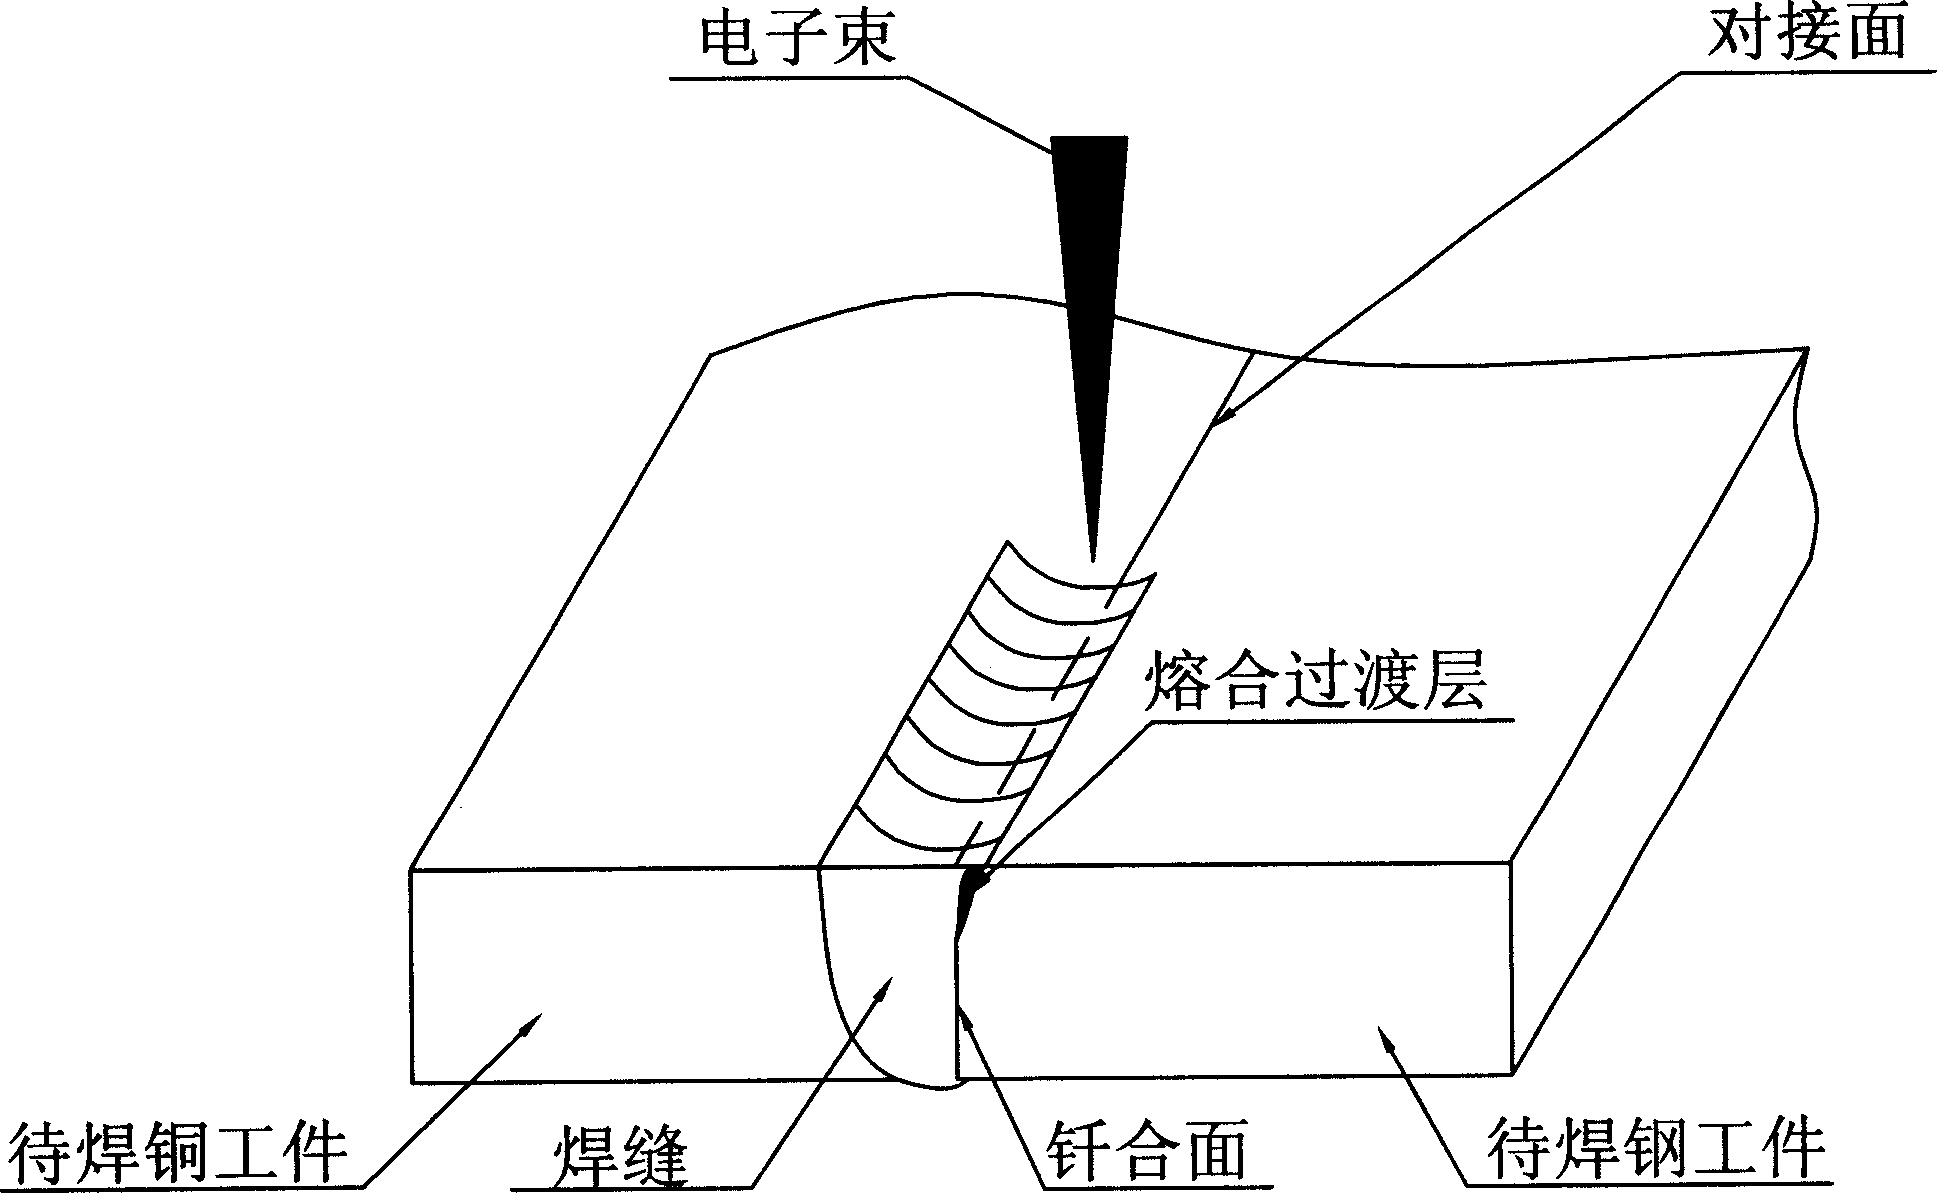 Joint reinforcing method for controlling copper alloy and steel butt-welding joint interface structure